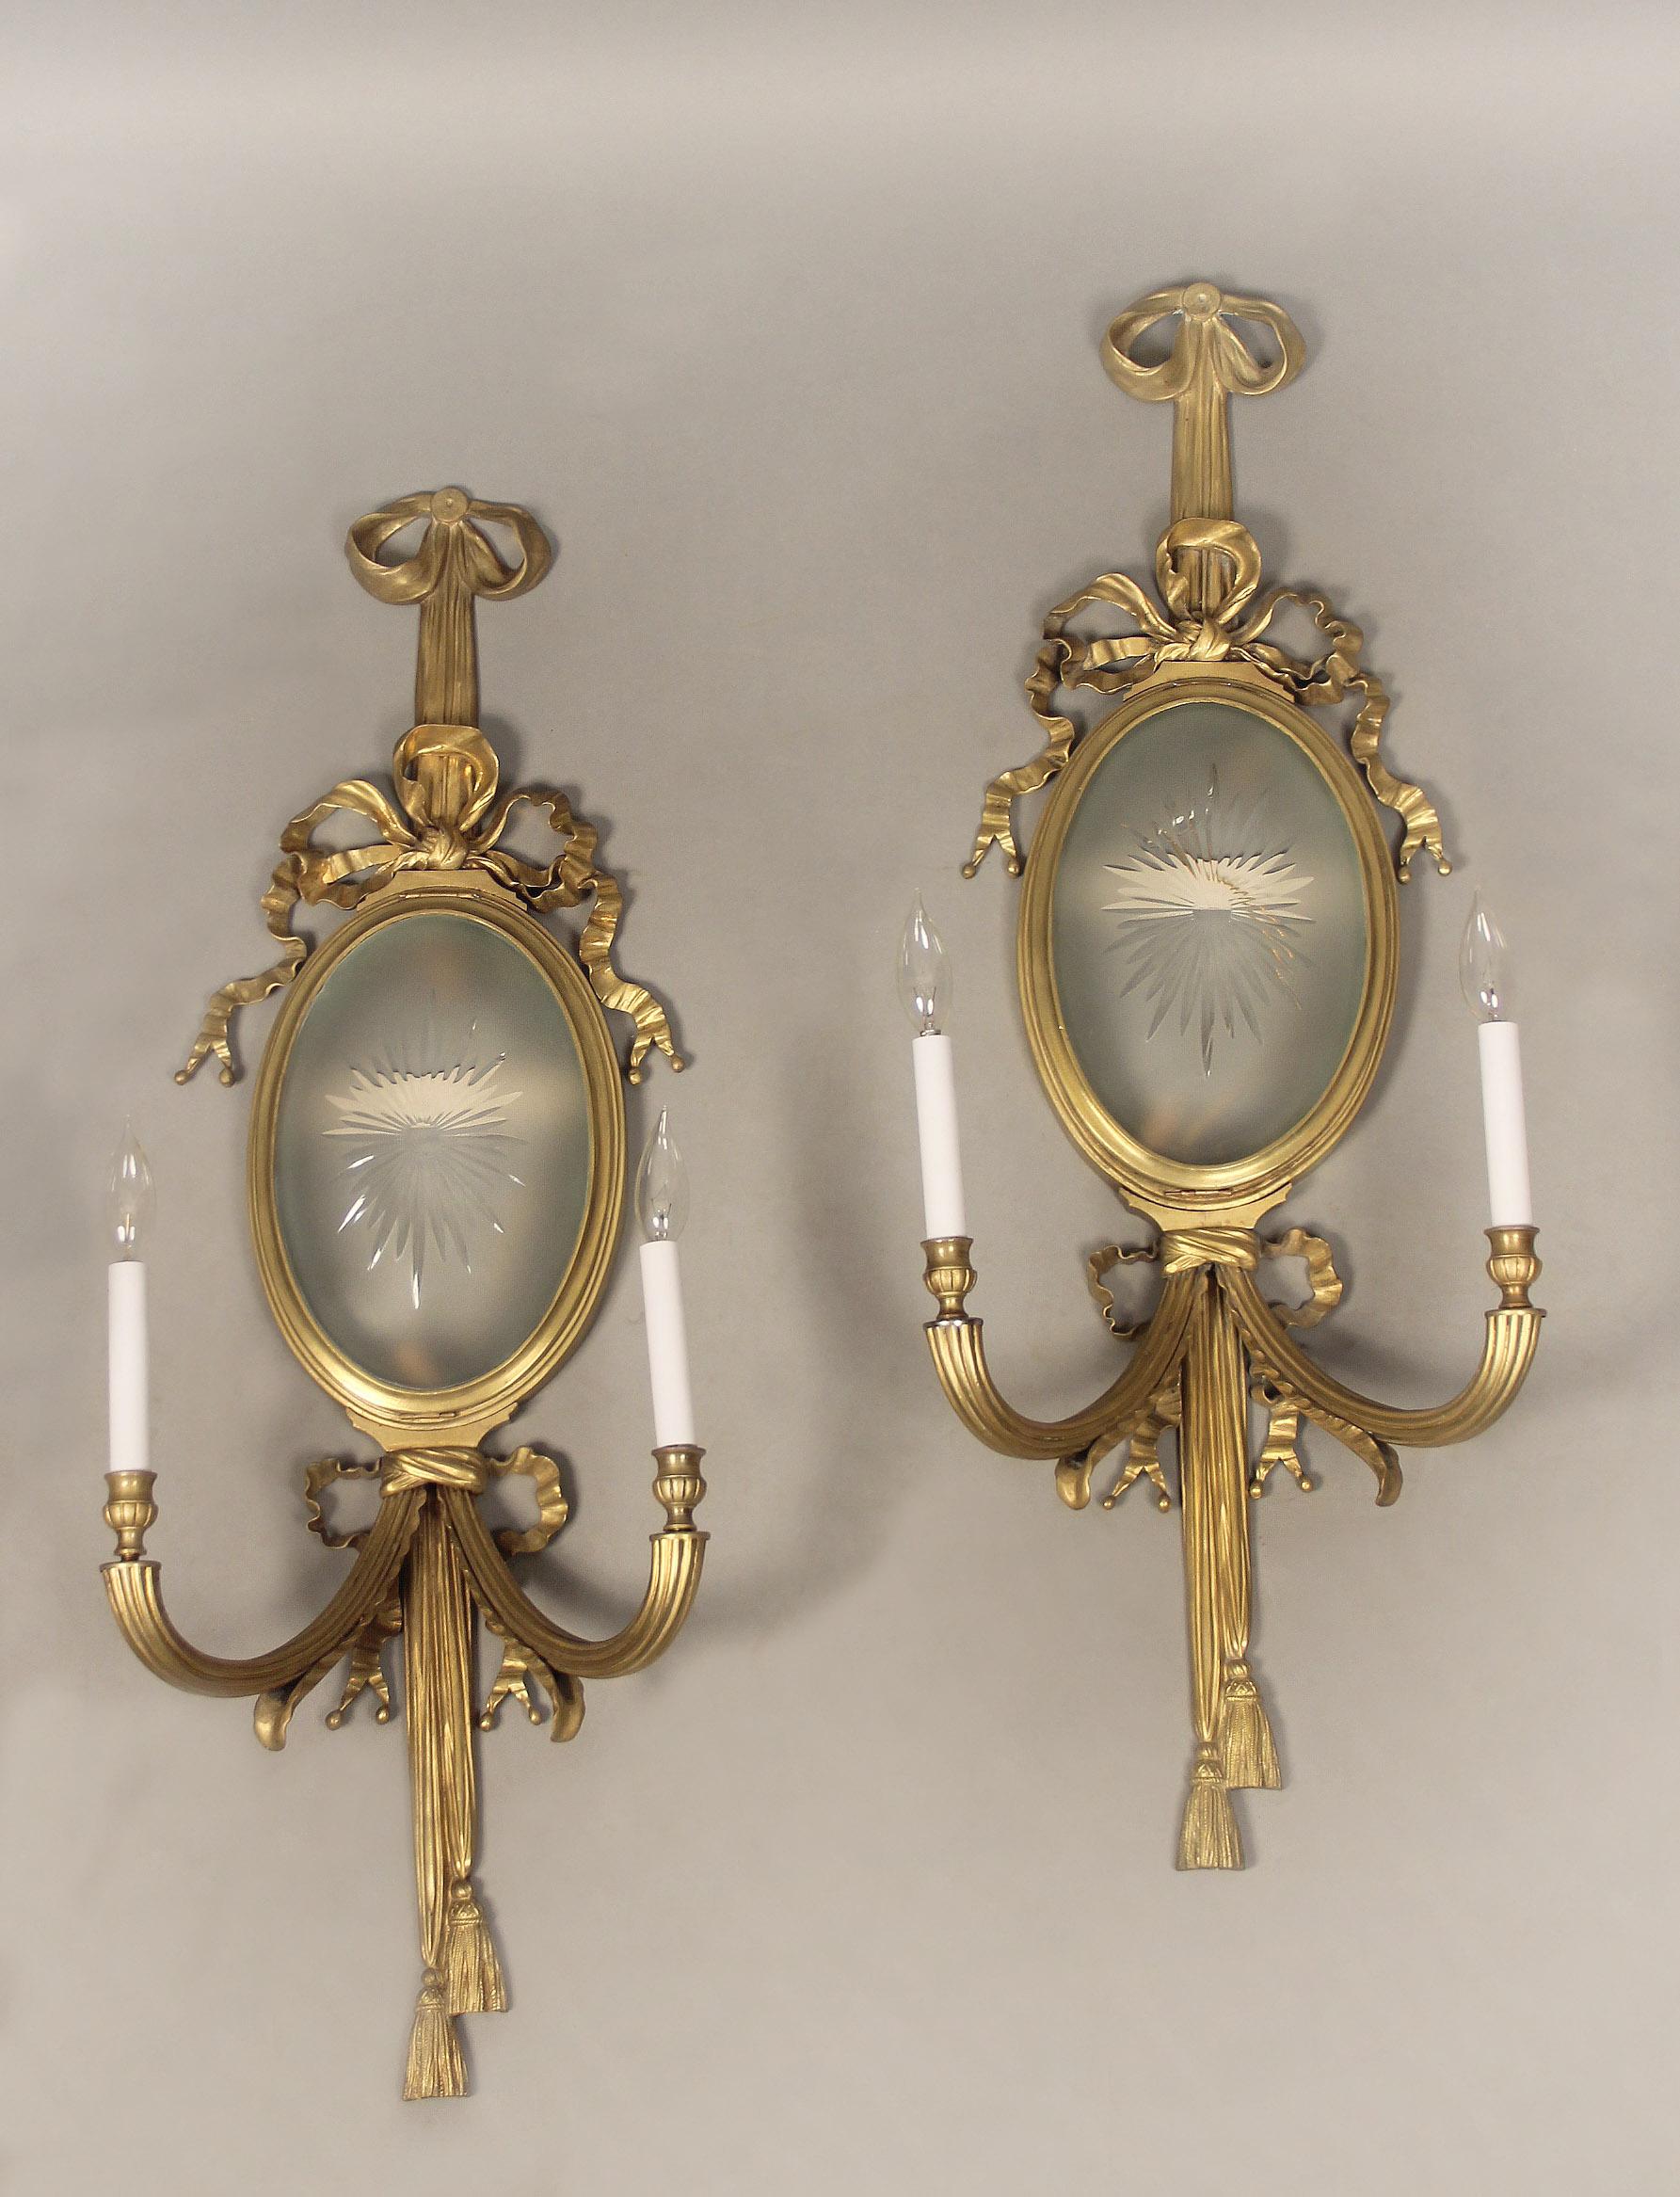 A pair of early 20th century gilt bronze four light sconces

Centered with a large etched frosted glass shade, surrounded by tied bows and ribbons, two lights behind the shade and two lit arms.